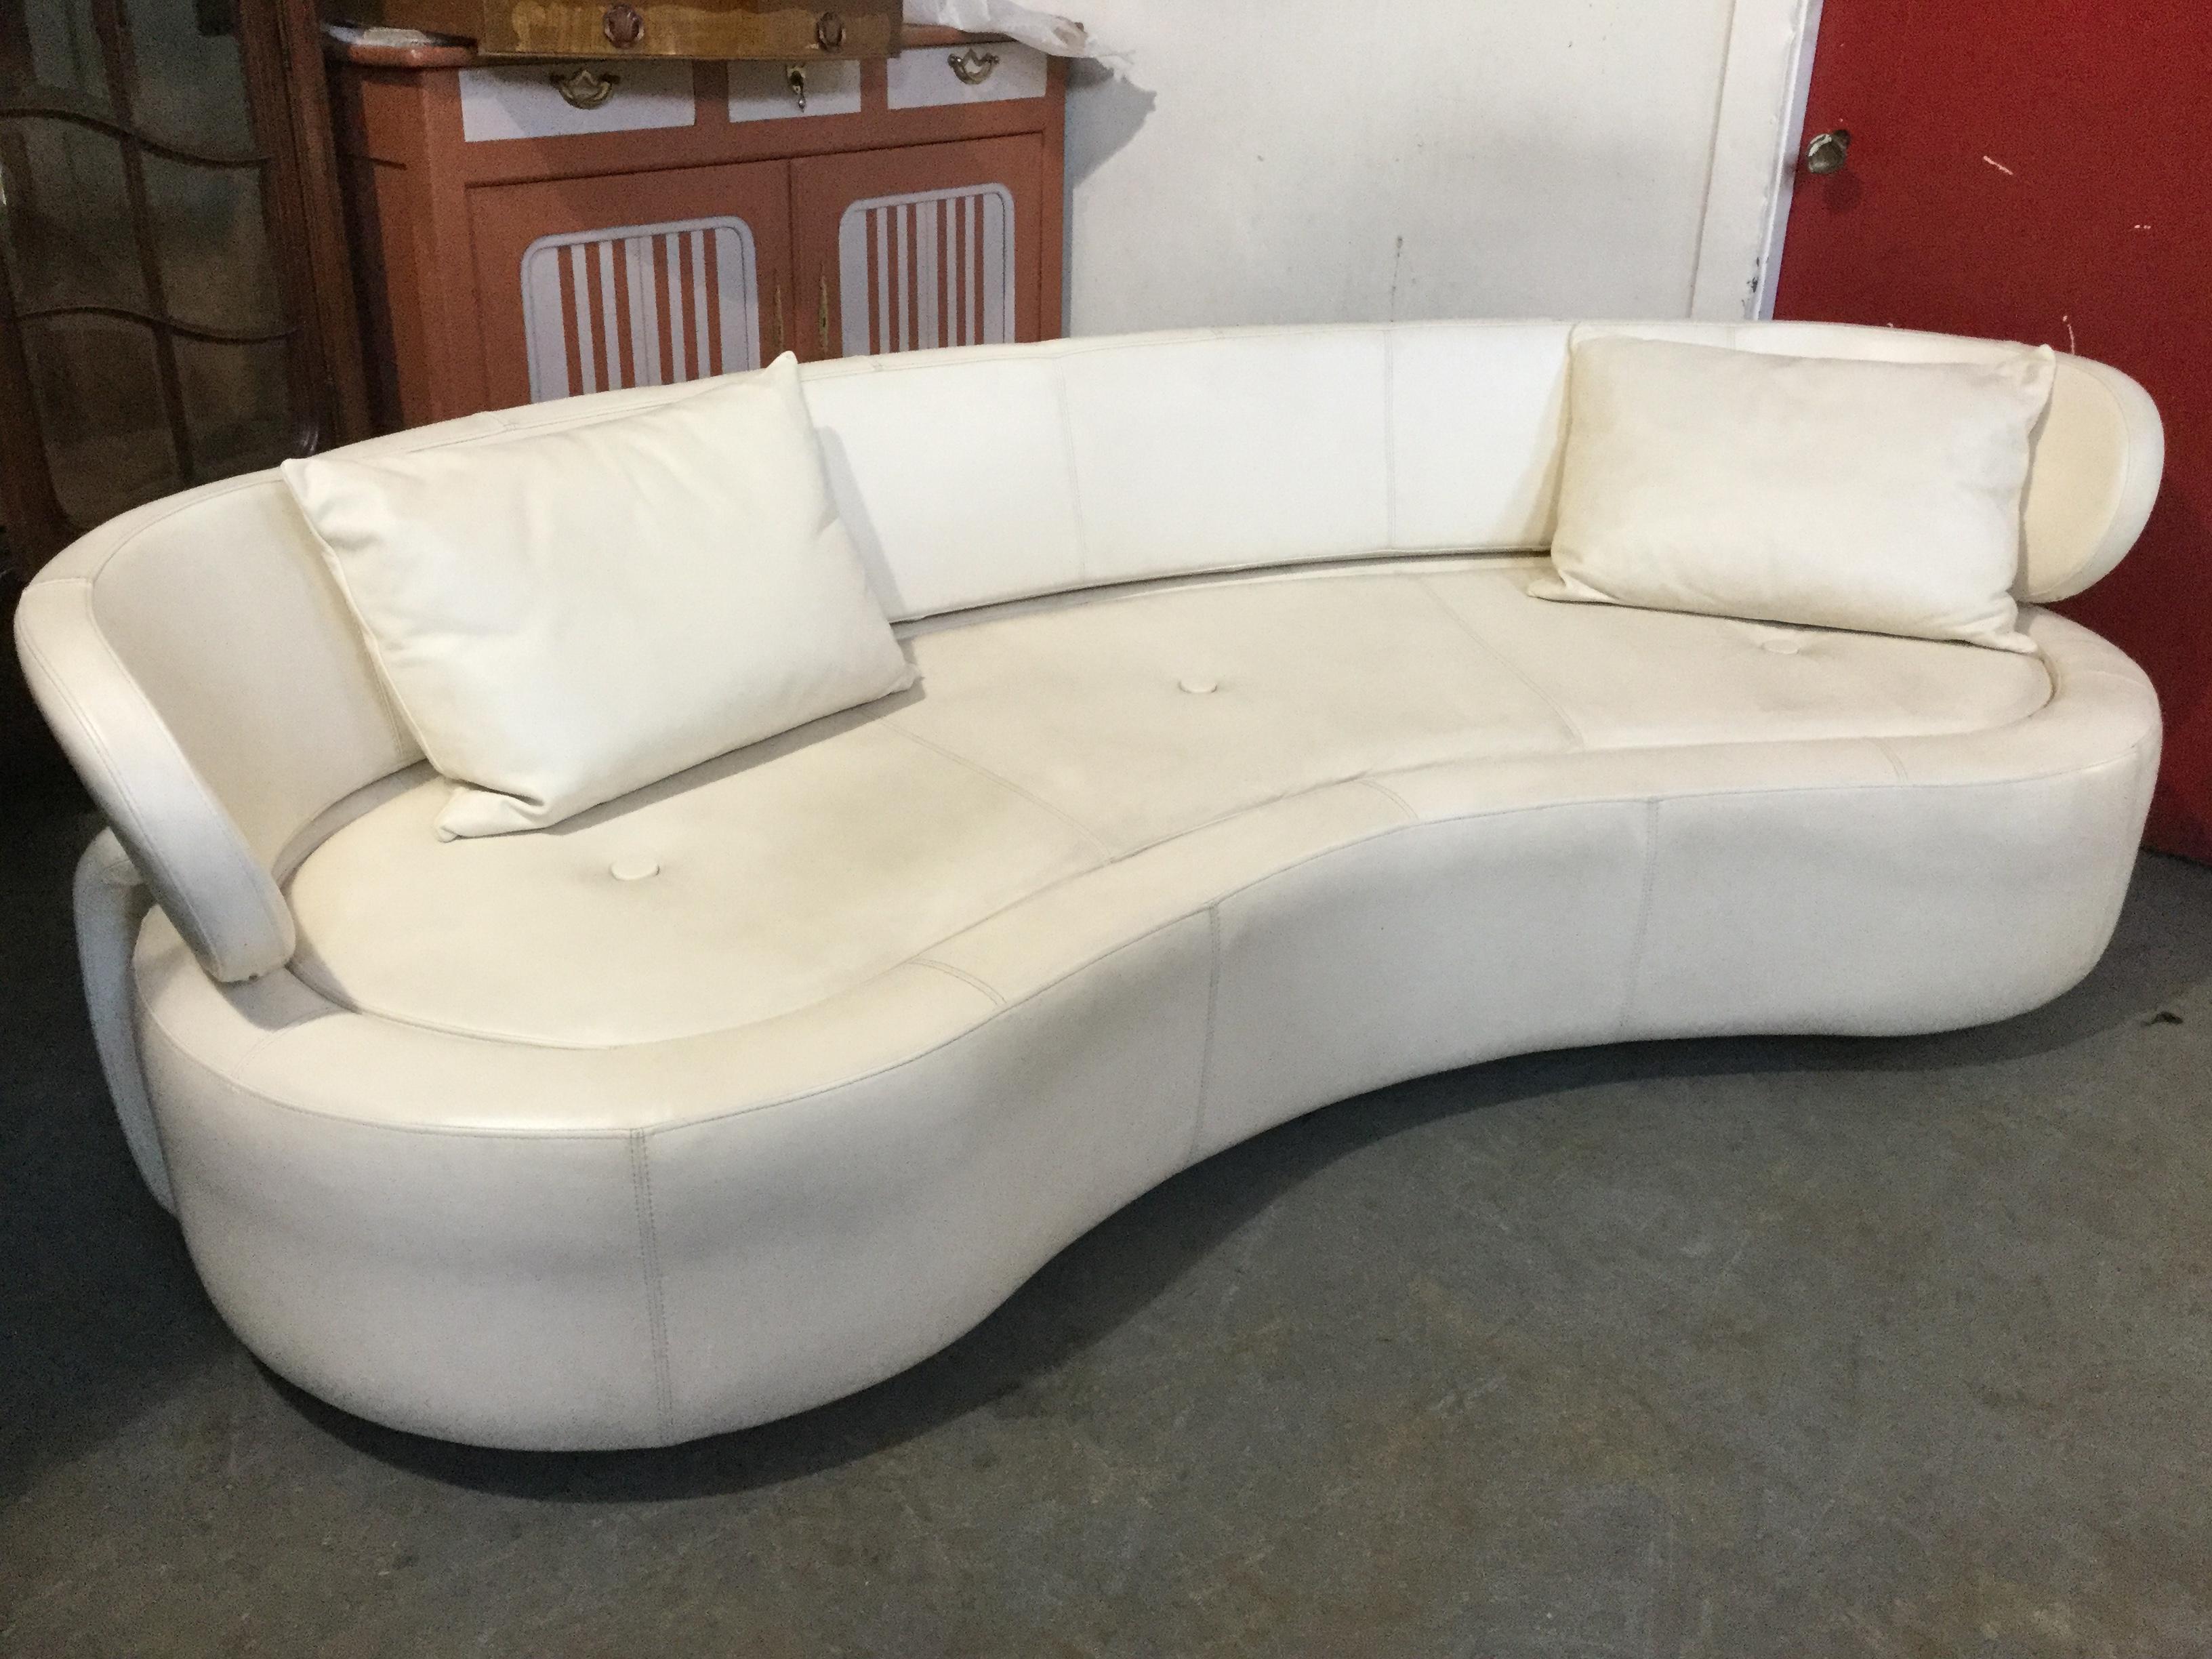 Sleek Danish modern white leather sofa, circa 1980s , having a super sexy sculptural curved silhouette with a long, low-slung back. There is detailed stitching and unusual leather panels attached to back for a haute-couture look. Two throw pillows